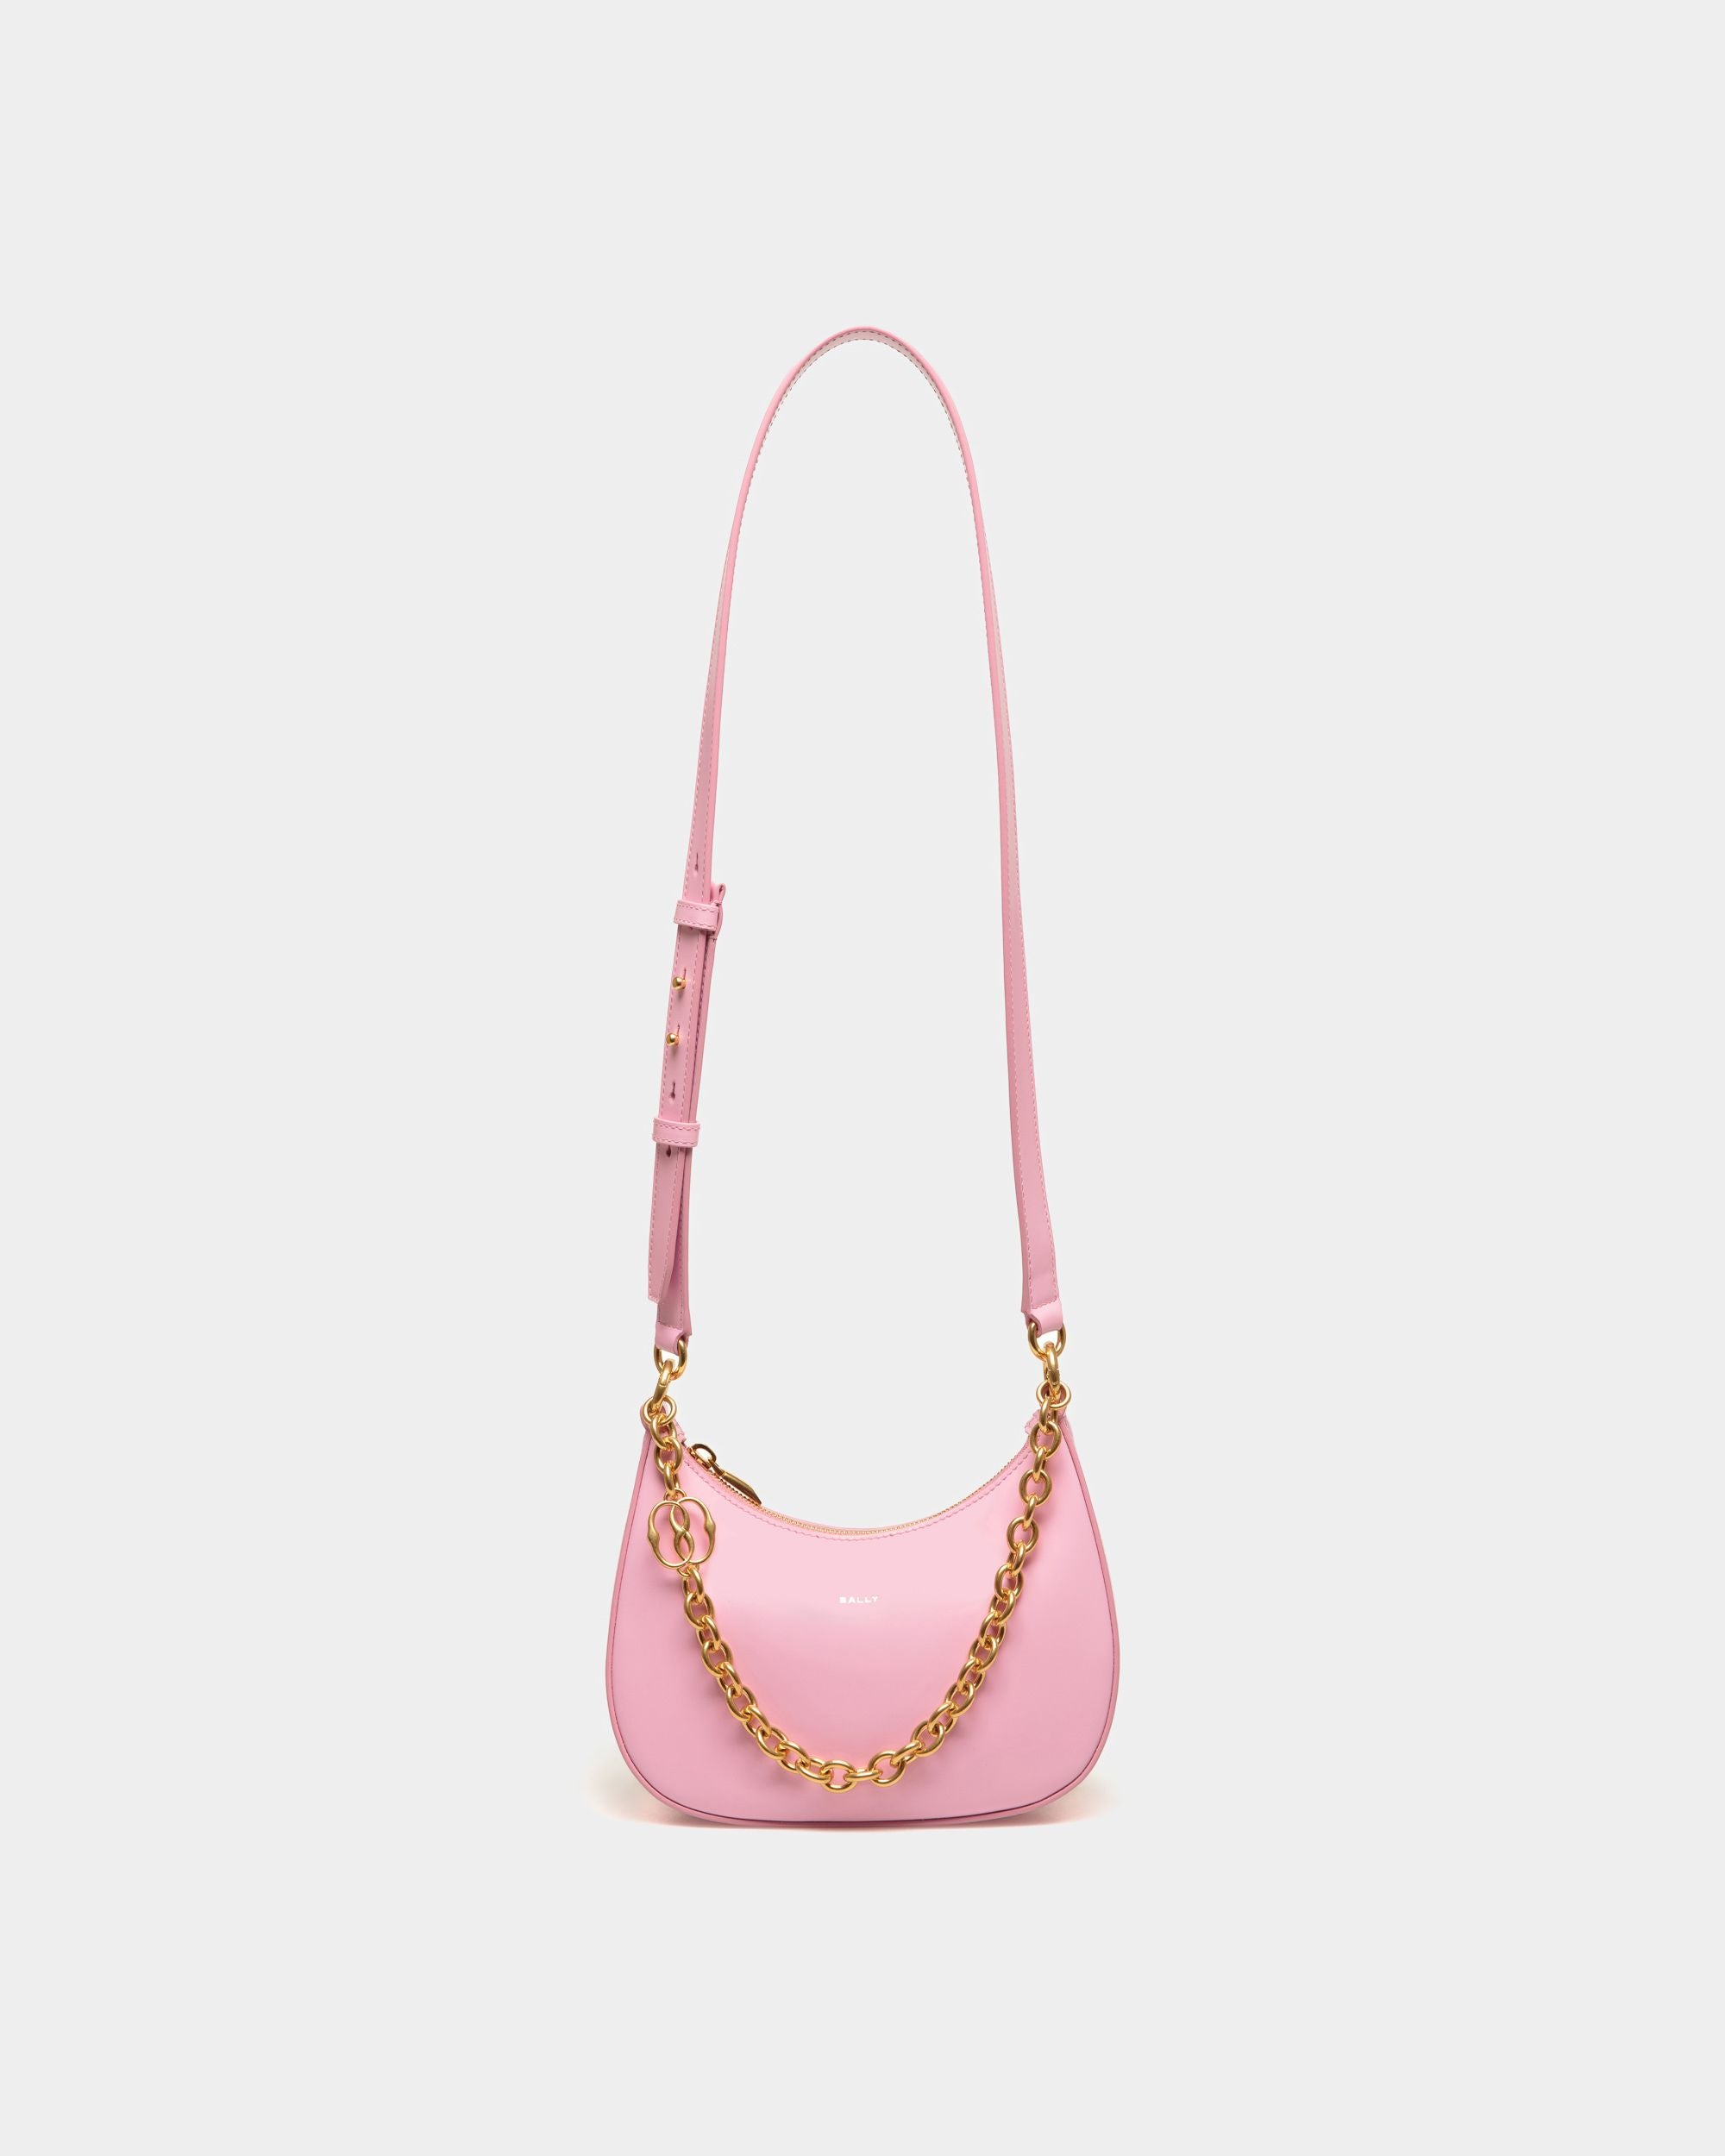 Women's Emblem Mini Crossbody Bag in Pink Brushed Leather | Bally | Still Life Front